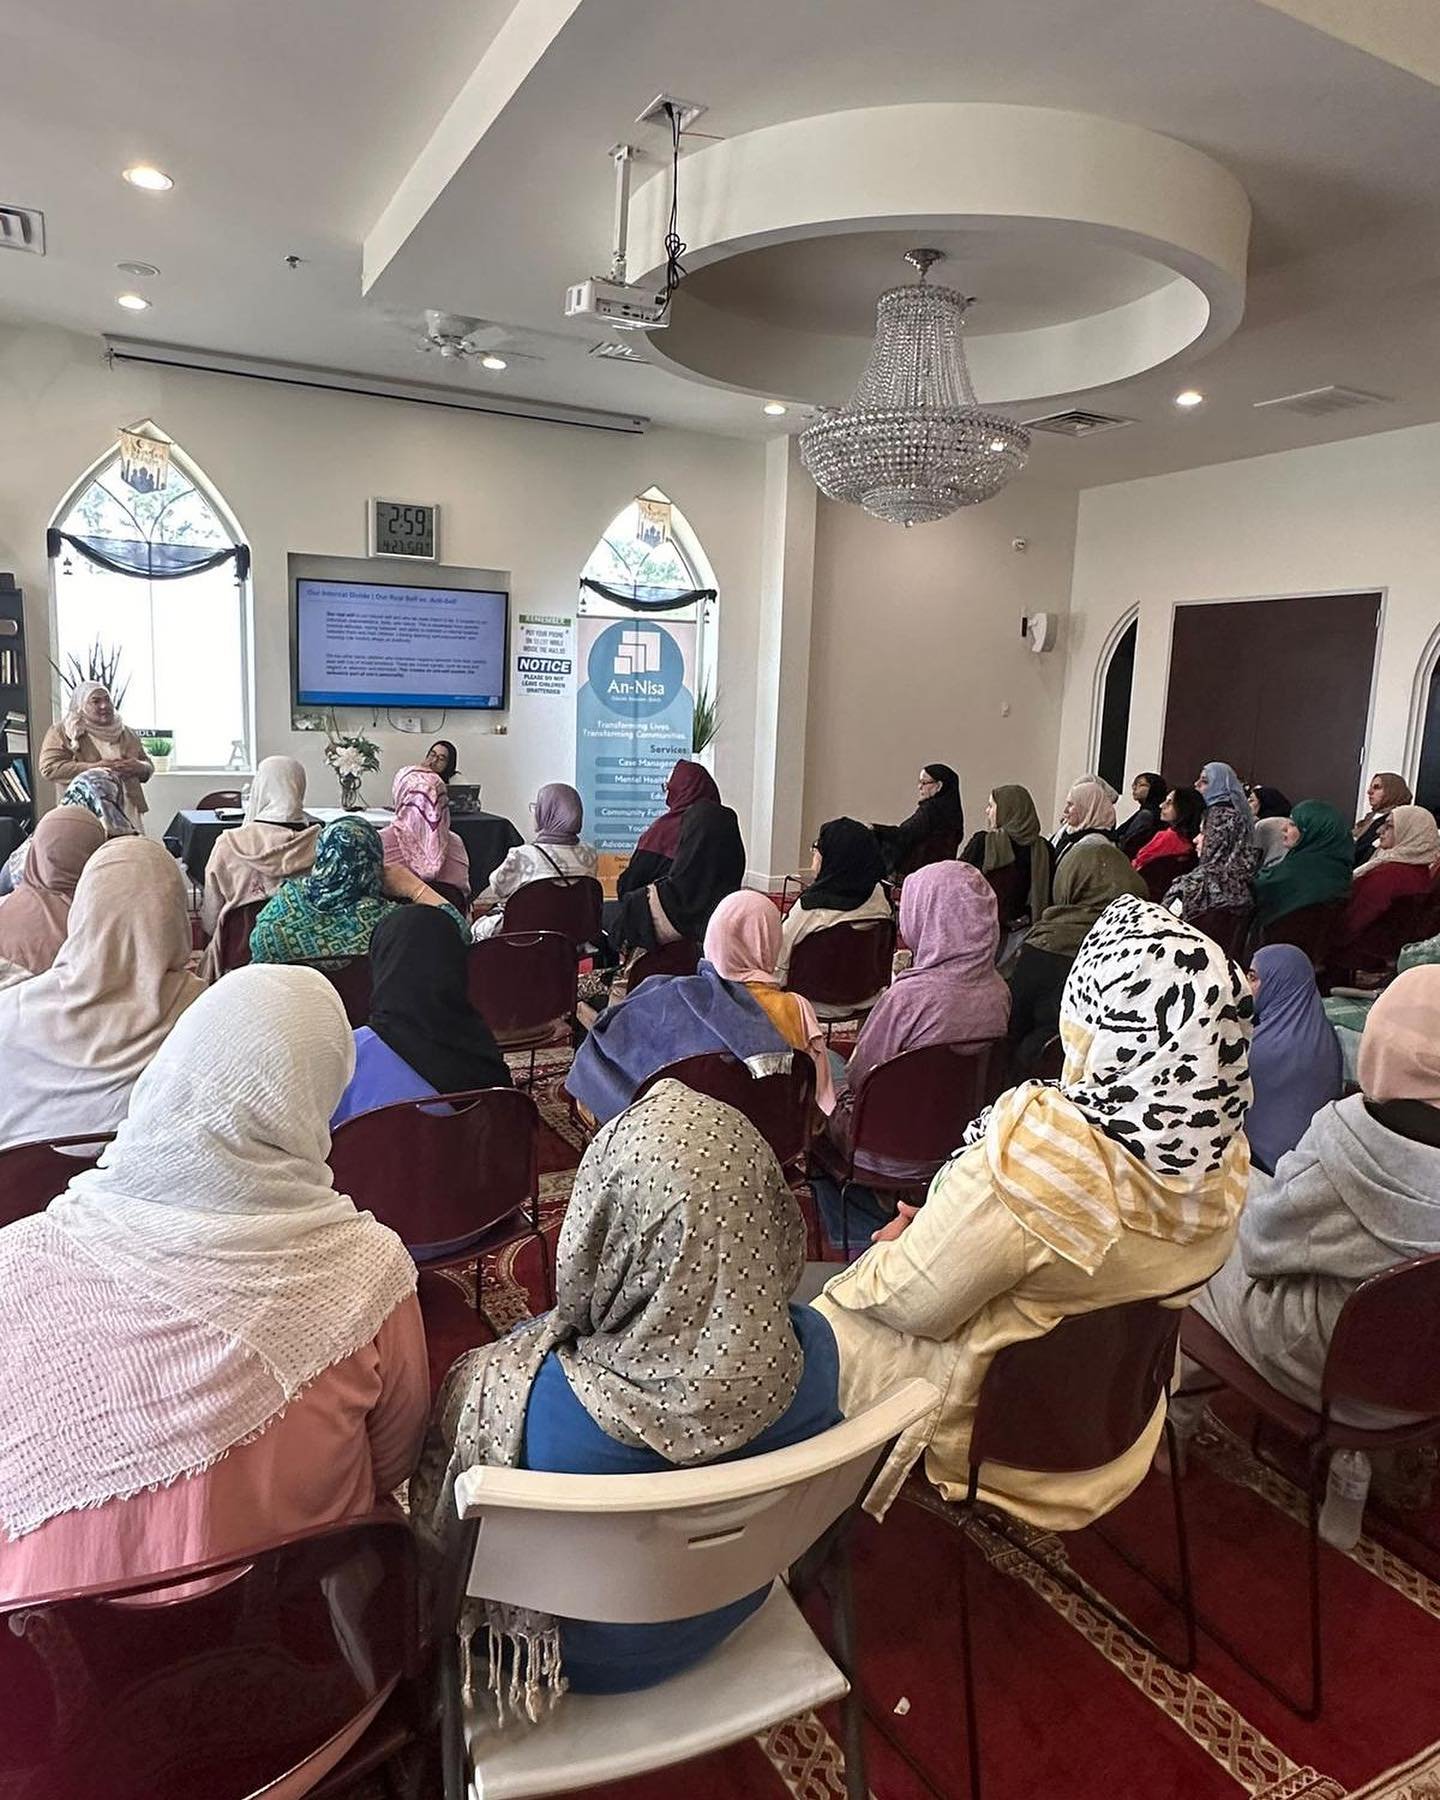 This past week we held a &ldquo;Knowing Yourself&rdquo; workshop at Masjid Aqsa!

Finding yourself is a lifelong journey, both externally and internally and opens the door to unlimited growth opportunities. All participants left with action items to 